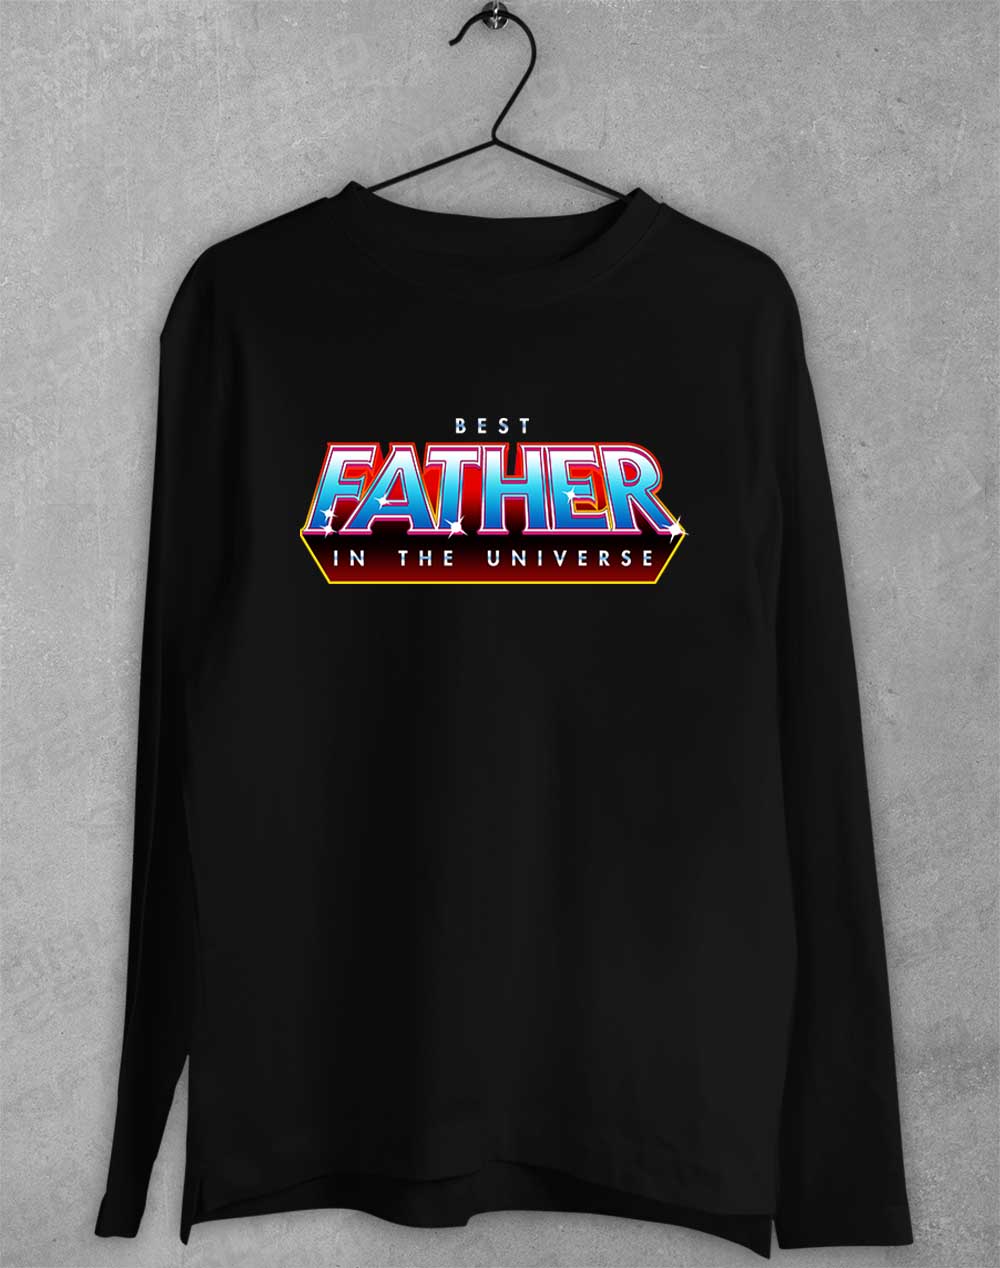 Black - Best Father in the Universe Long Sleeve T-Shirt